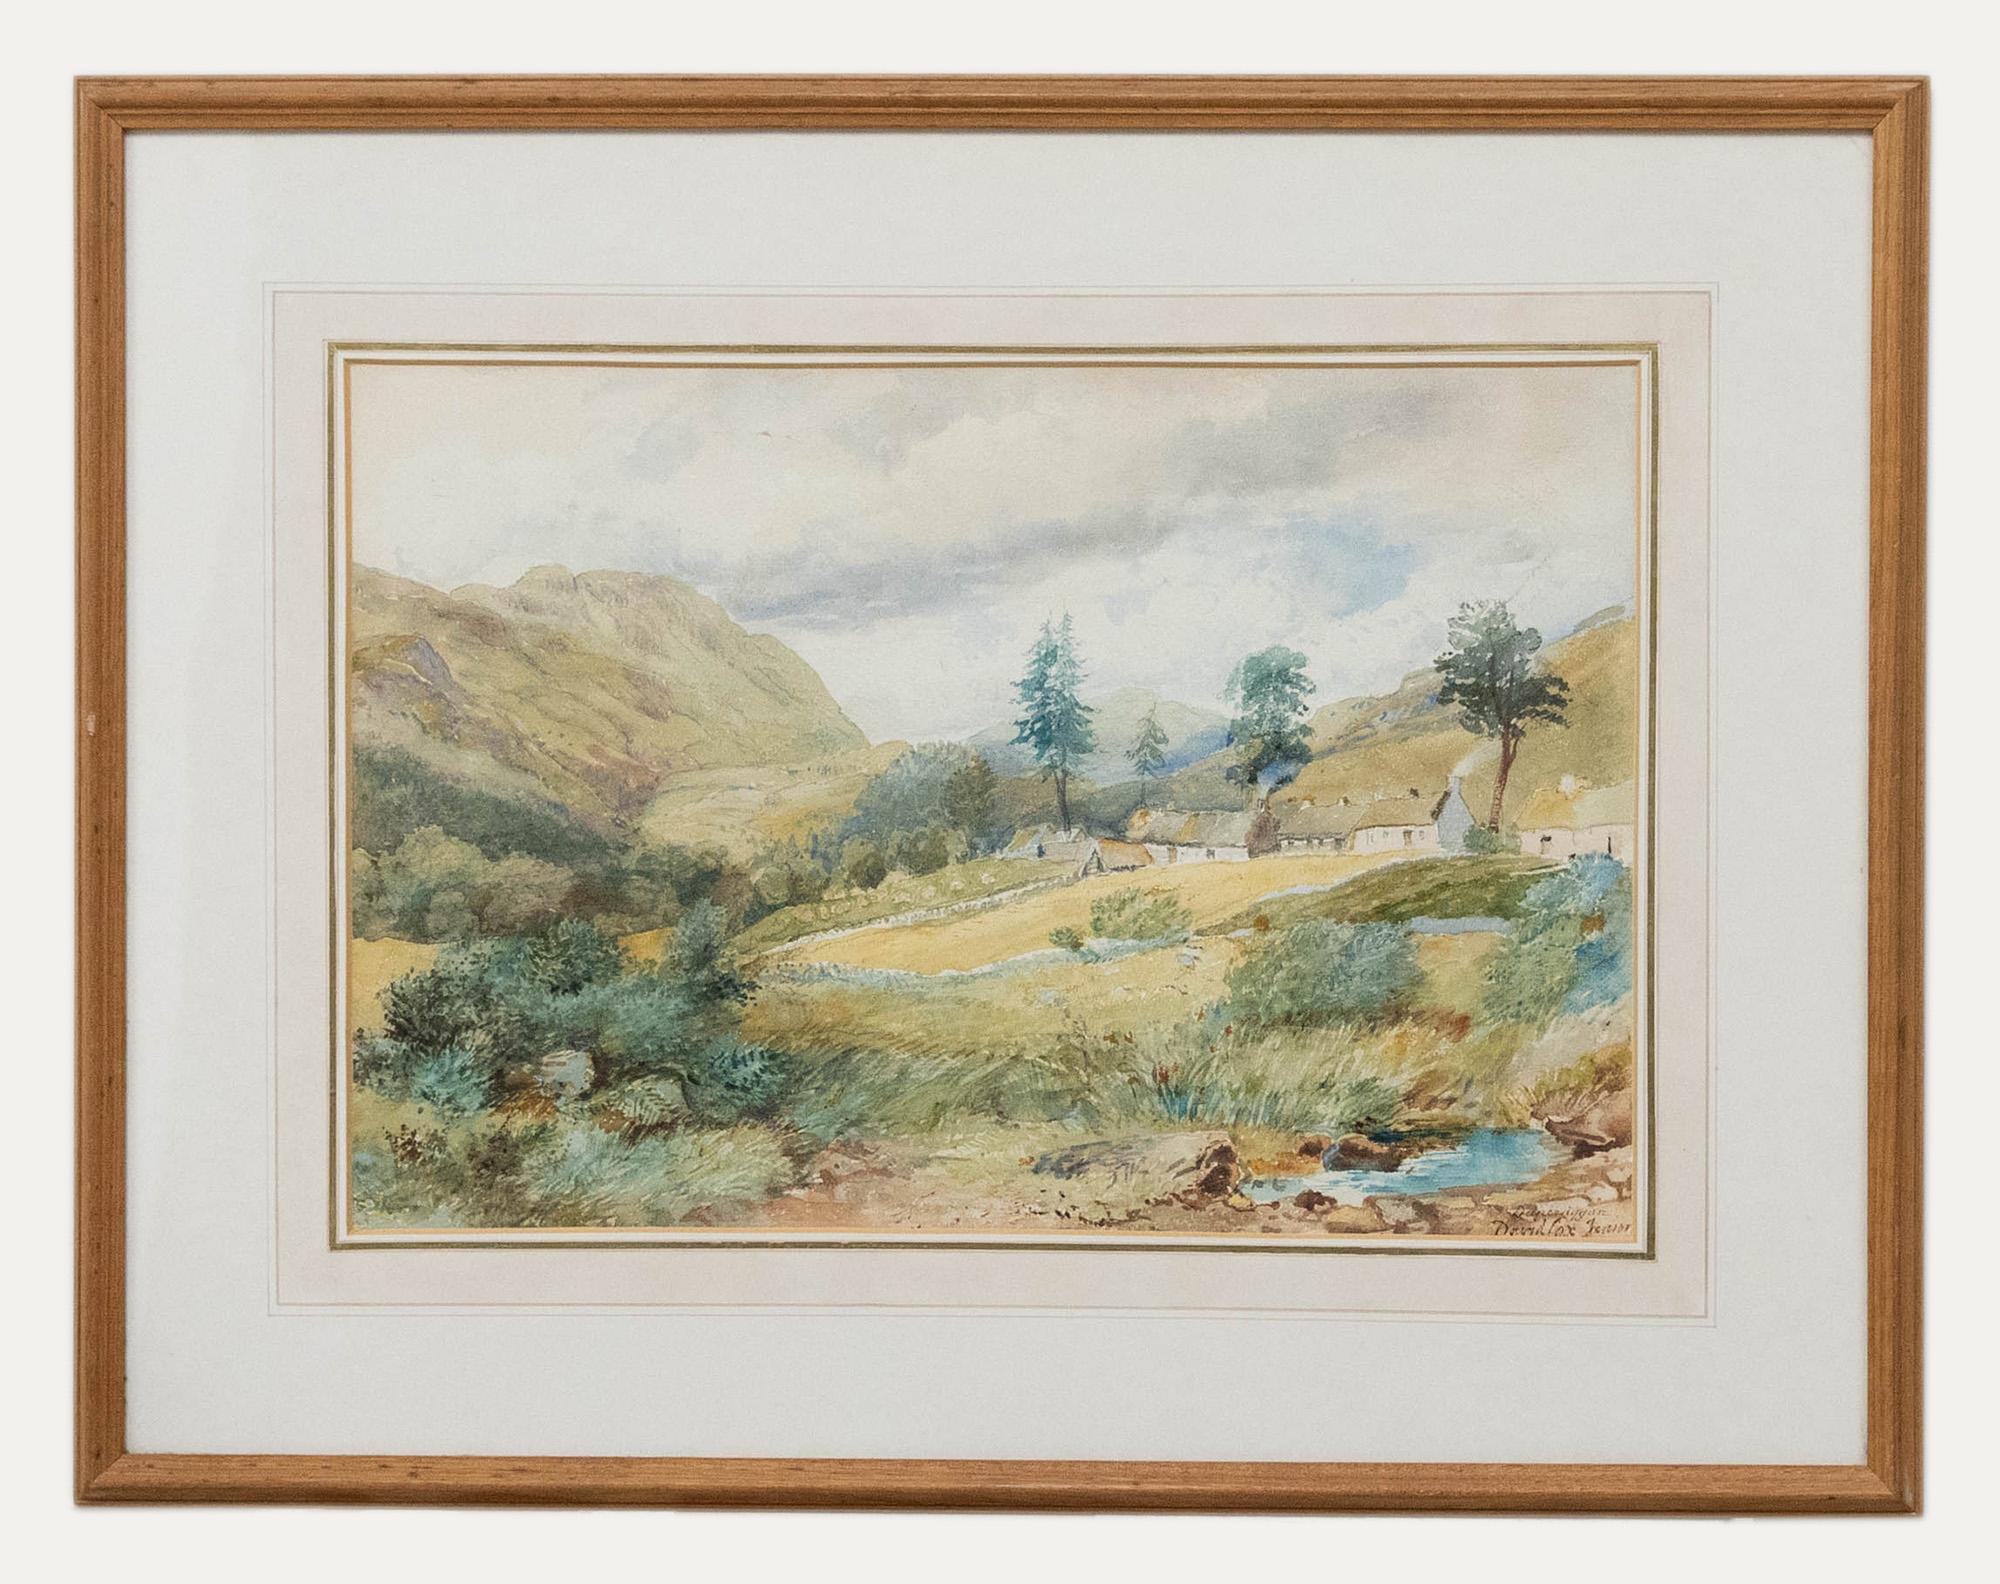 David Cox Jnr. ARWS (1809-1885)- original watercolour. Mountain landscape with cottages. Signed and inscribed to the lower right. Presented in a glazed oak frame. Labelled to the reverse. On watercolour paper.
